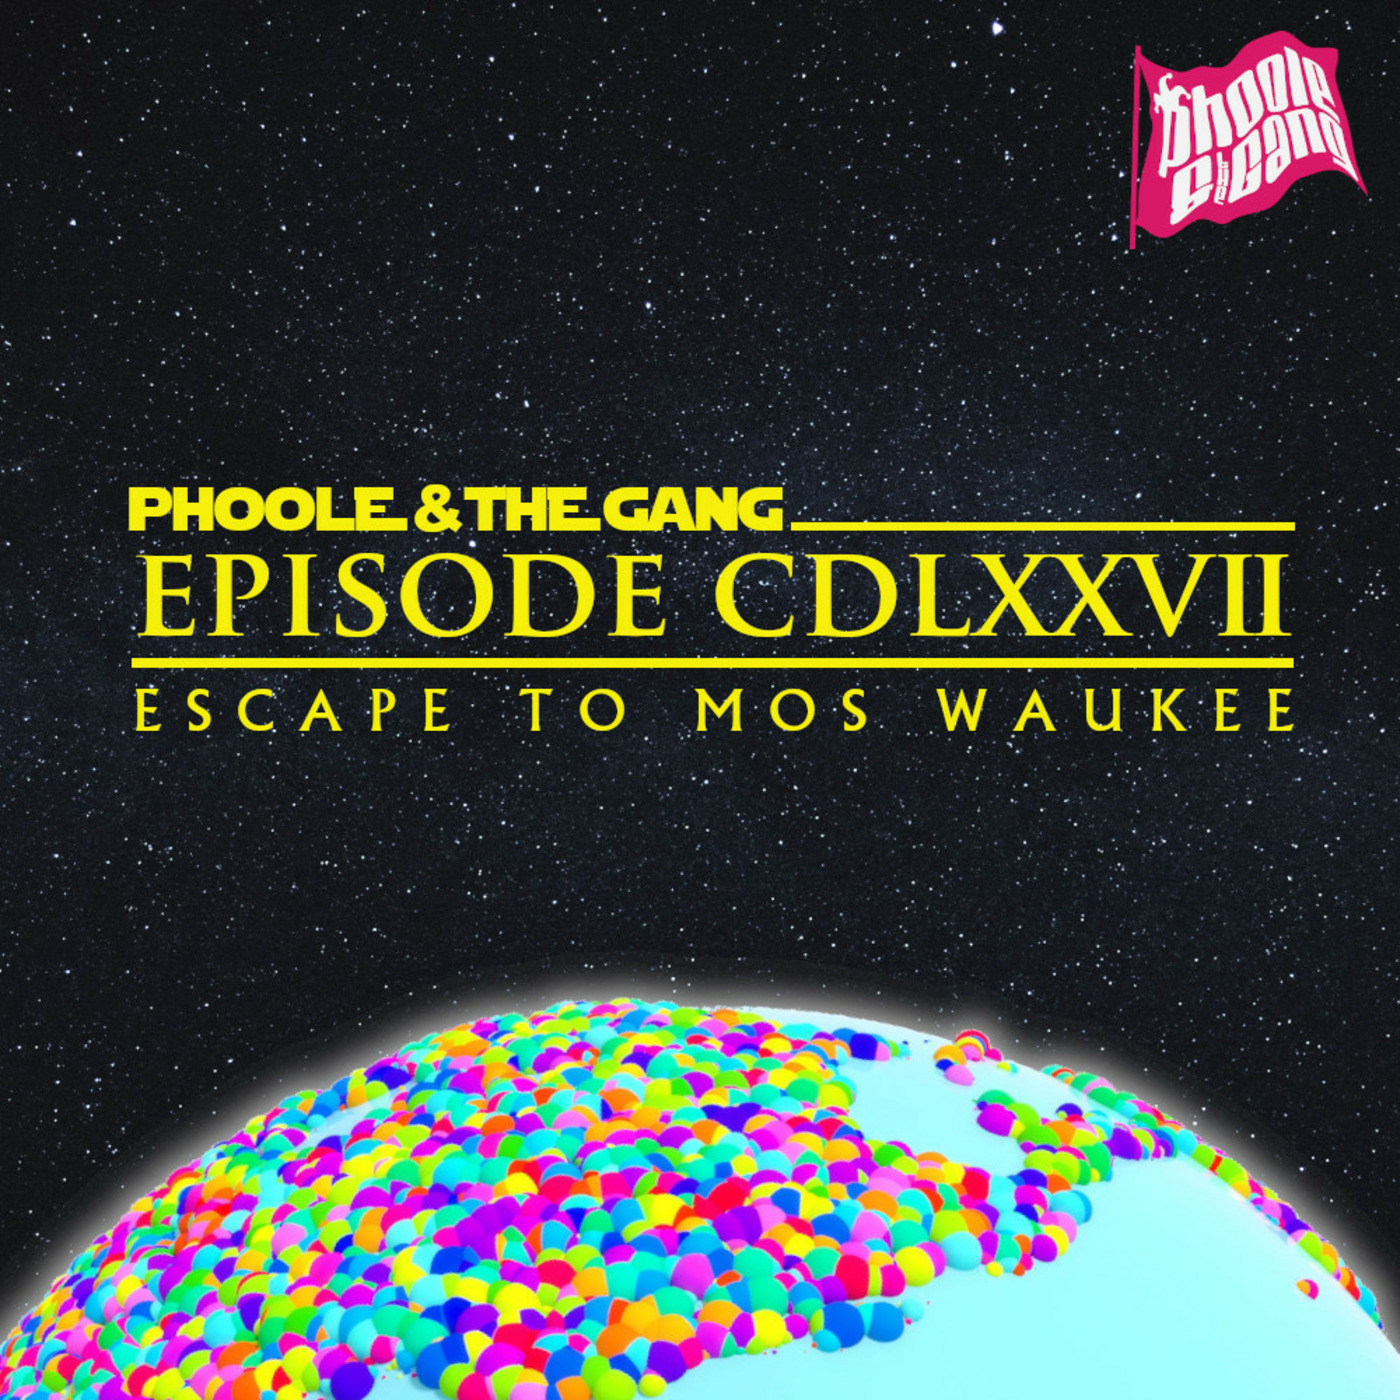 Escape to Mos Waukee! Star Wars Show - Phoole and the Gang 477